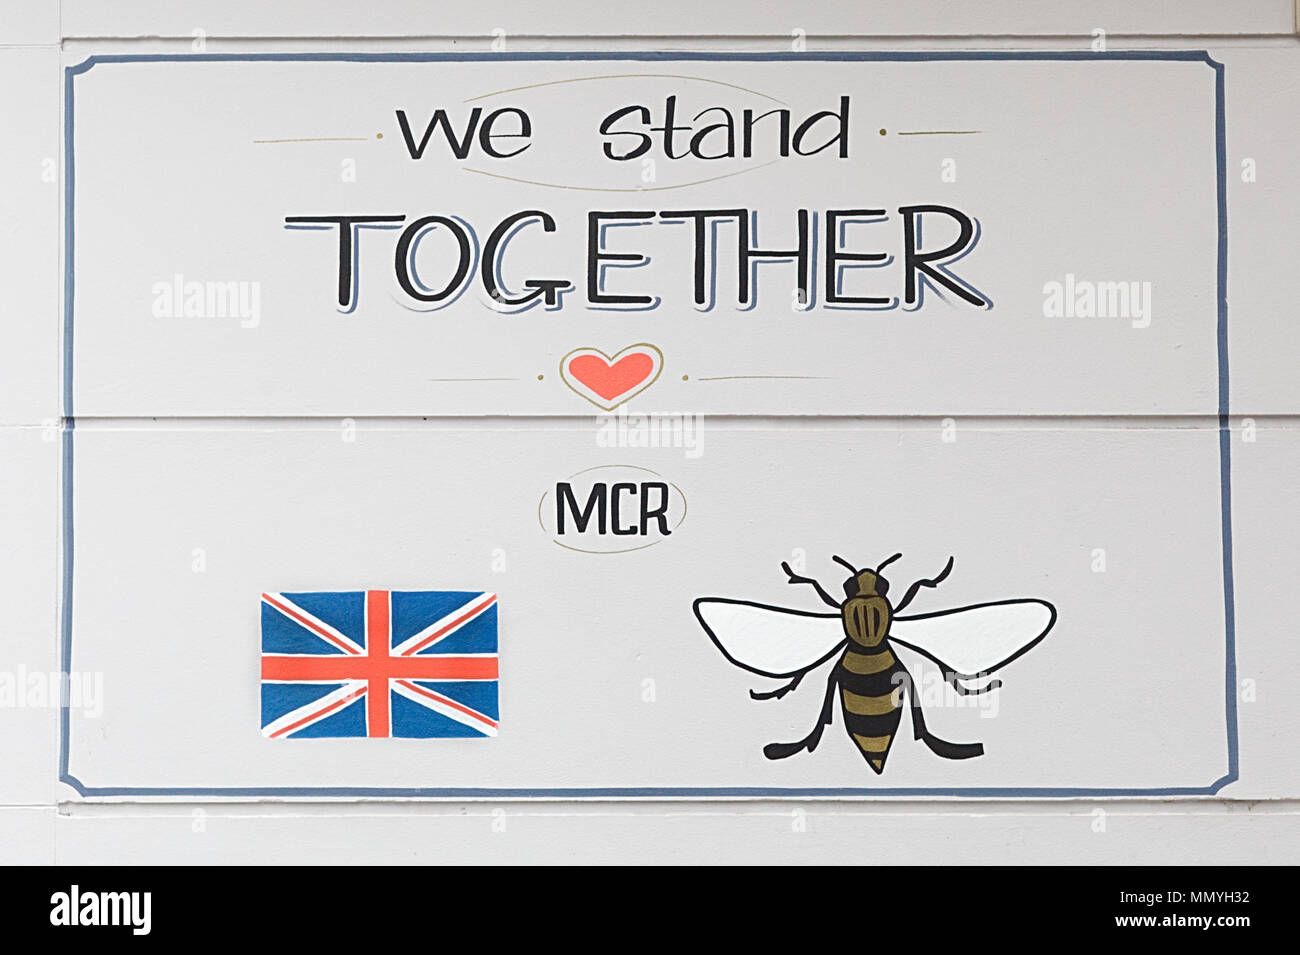 we stand together, Manchester sign Stock Photo